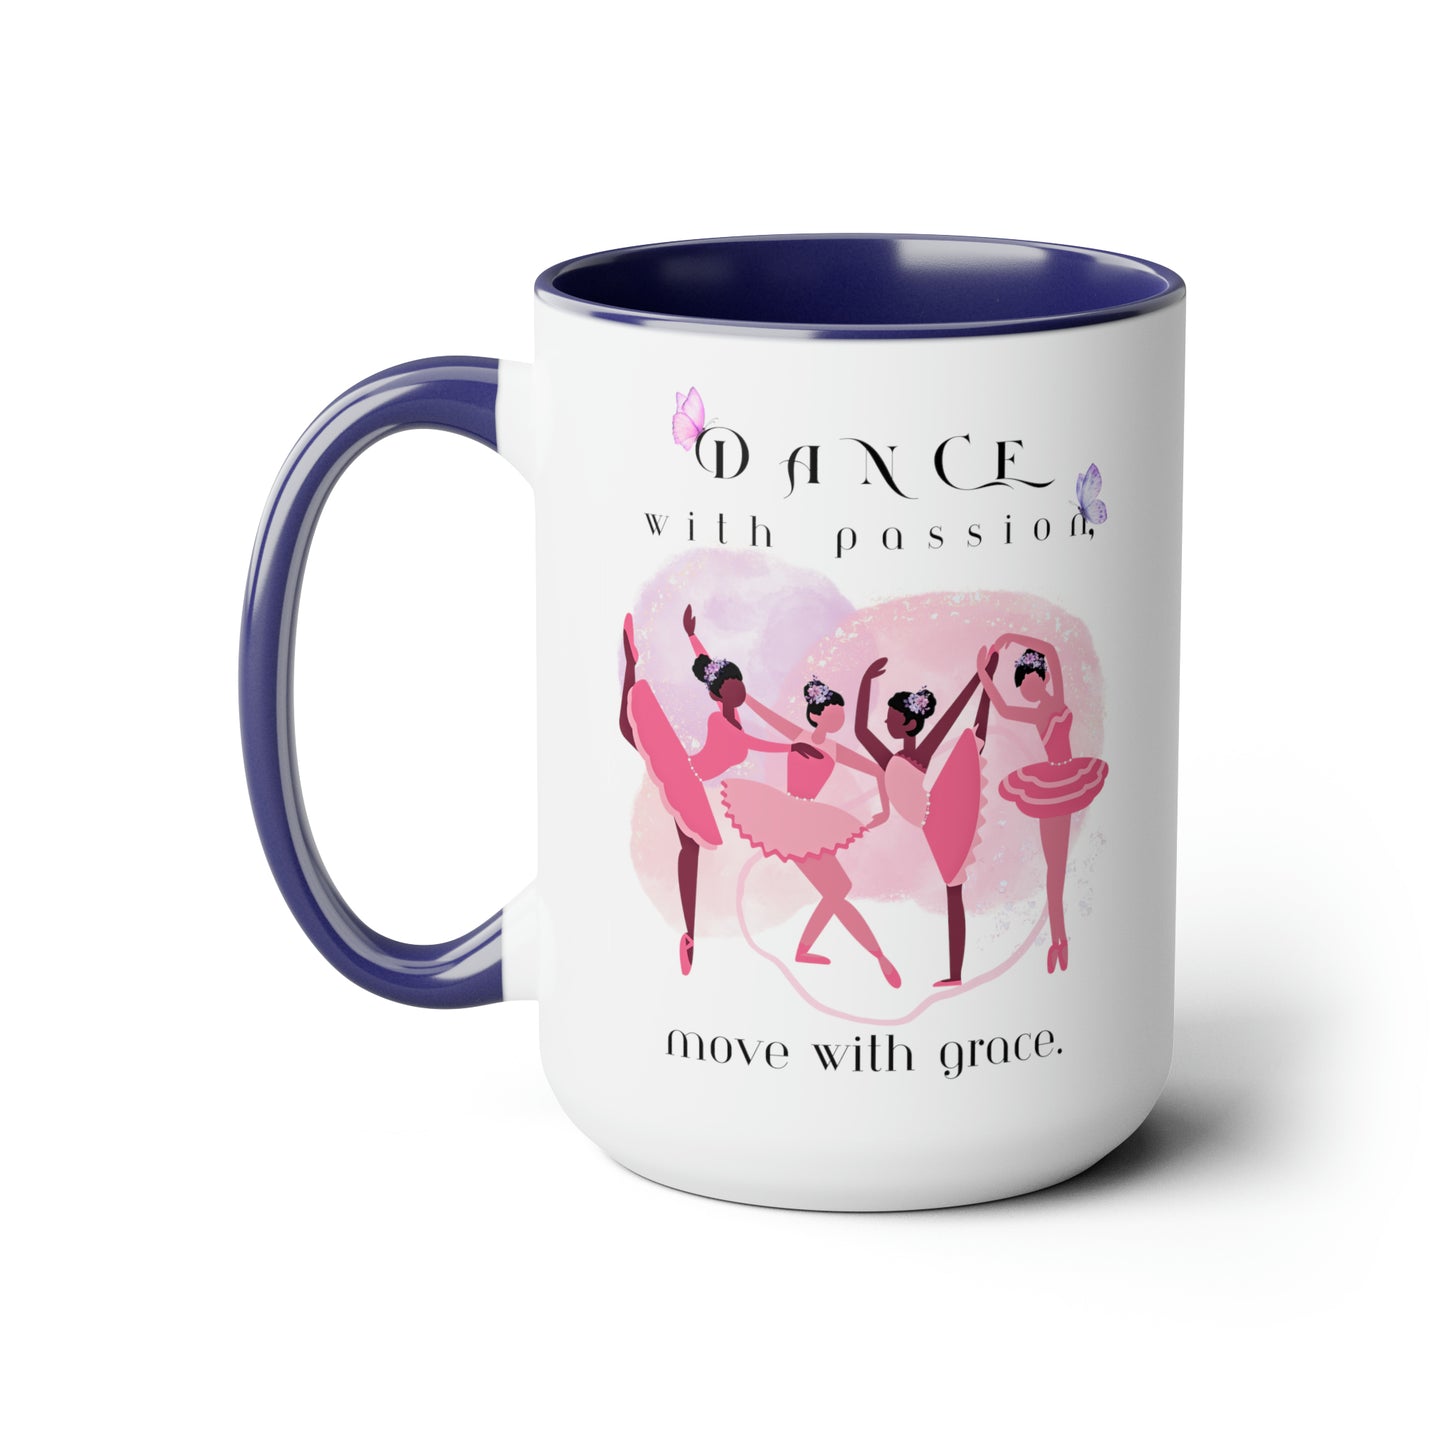 Two-Tone Coffee Mugs - Dance with passion Ballerina